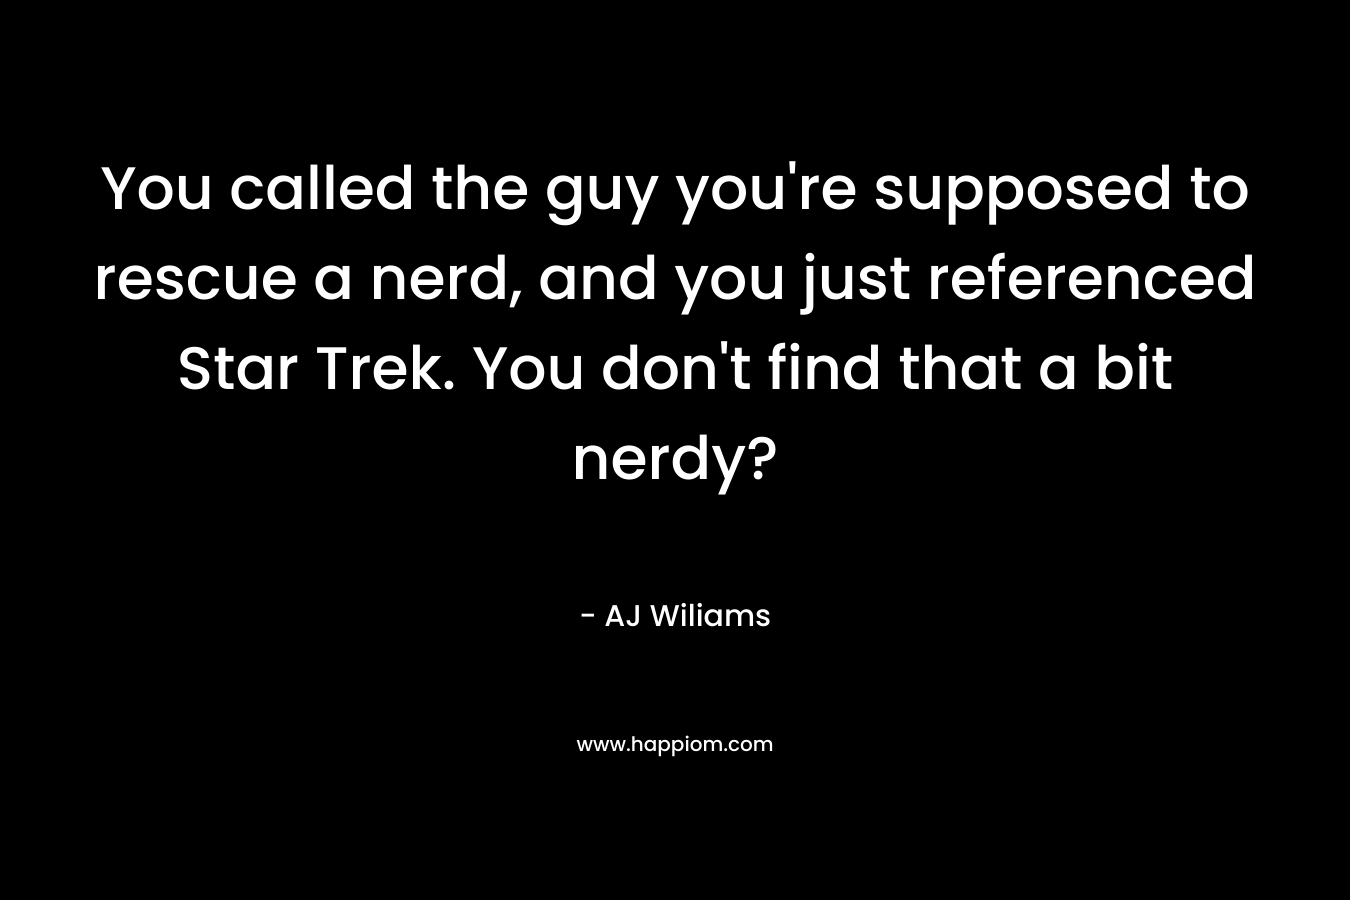 You called the guy you’re supposed to rescue a nerd, and you just referenced Star Trek. You don’t find that a bit nerdy? – AJ Wiliams